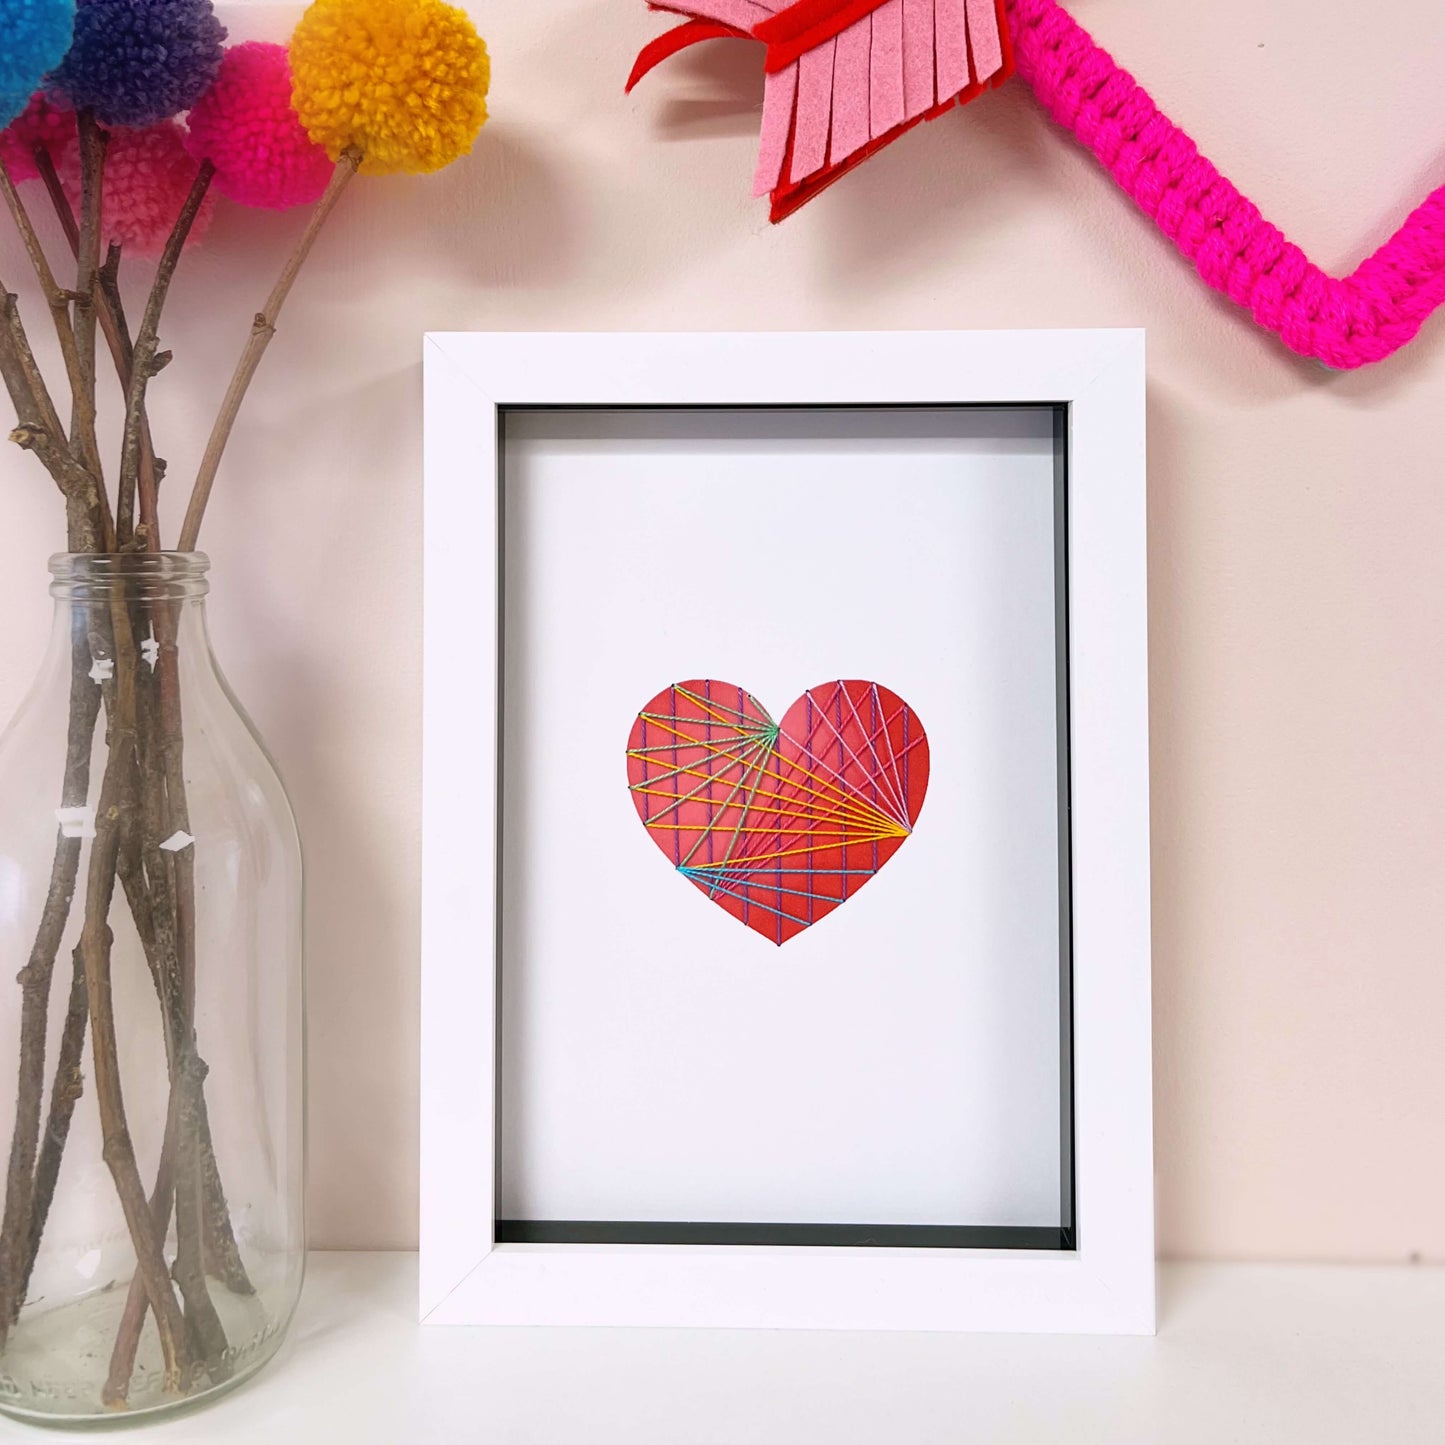 Embroidered Heart Artwork - Limited Edition